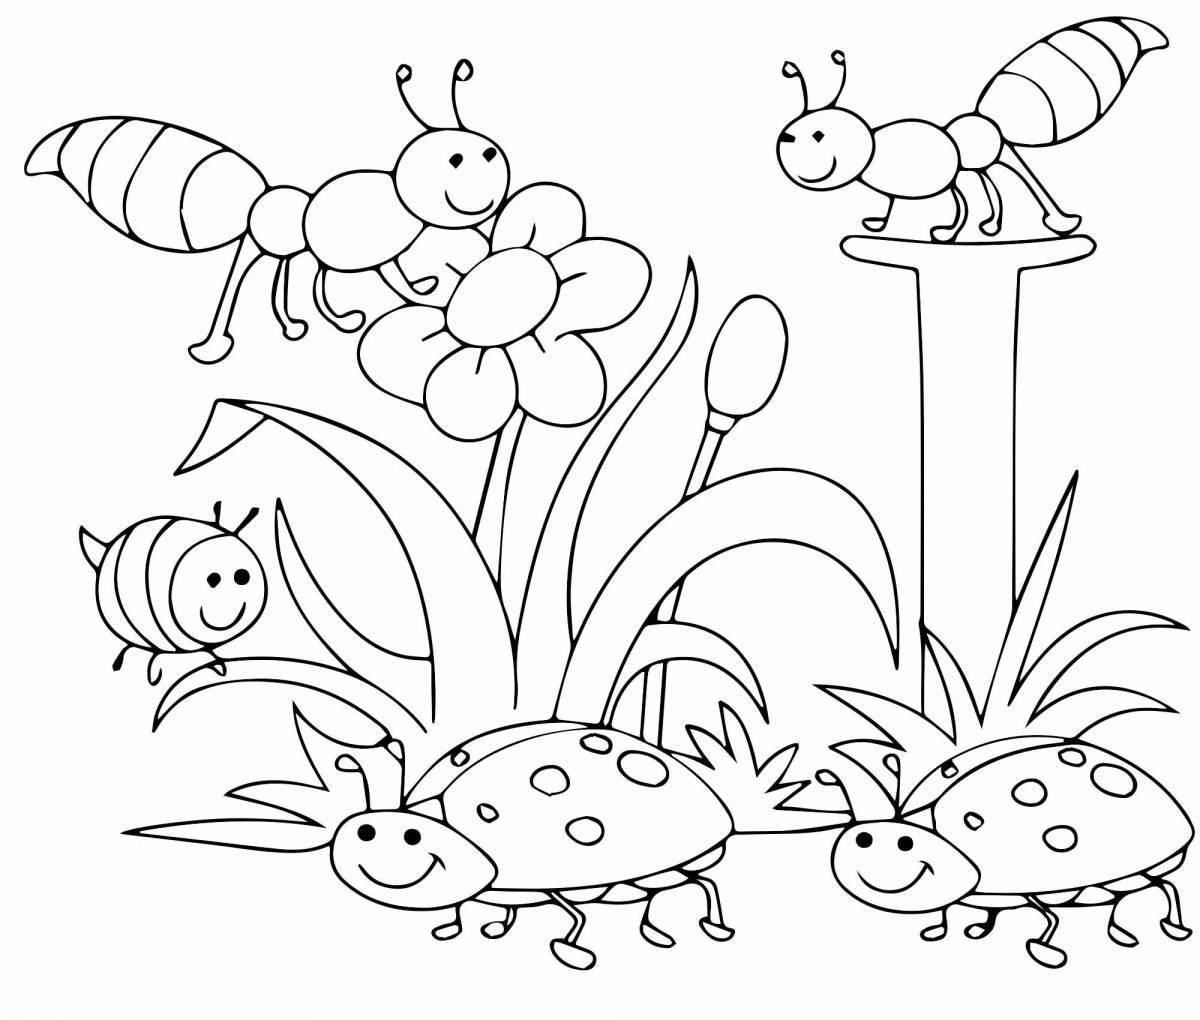 Crazy coloring pages for kids 6-7 years old